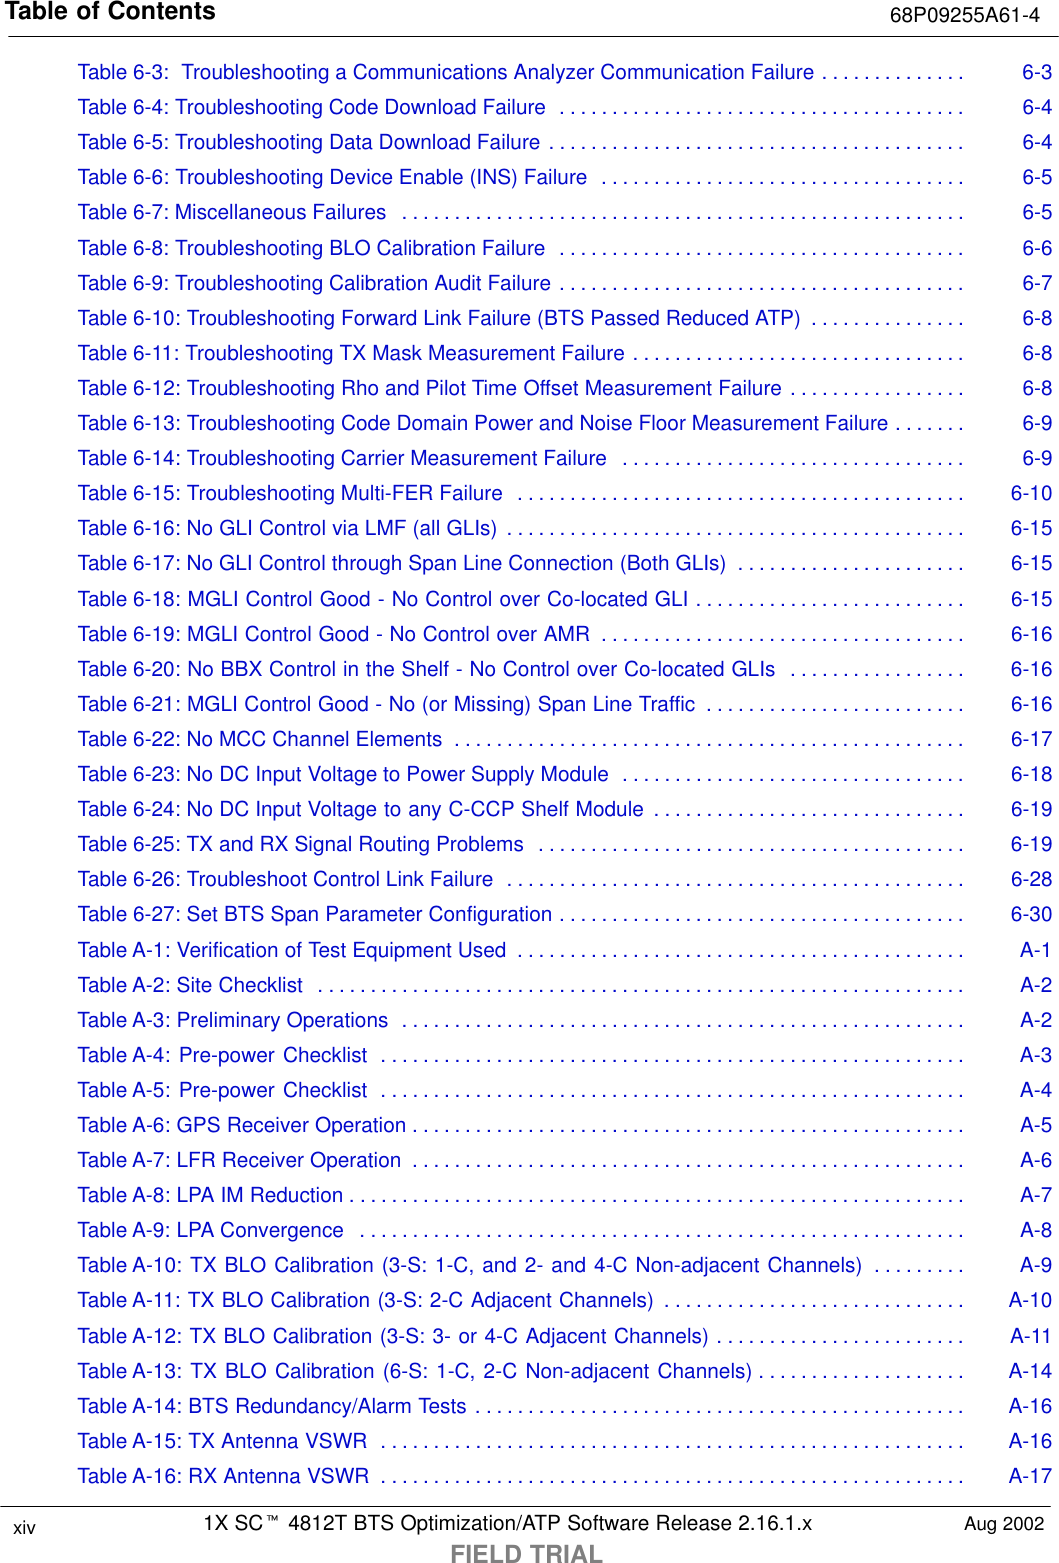 Table of Contents 68P09255A61-41X SCt 4812T BTS Optimization/ATP Software Release 2.16.1.xFIELD TRIALxiv Aug 2002Table 6-3:  Troubleshooting a Communications Analyzer Communication Failure 6-3. . . . . . . . . . . . . . Table 6-4: Troubleshooting Code Download Failure 6-4. . . . . . . . . . . . . . . . . . . . . . . . . . . . . . . . . . . . . . . Table 6-5: Troubleshooting Data Download Failure 6-4. . . . . . . . . . . . . . . . . . . . . . . . . . . . . . . . . . . . . . . . Table 6-6: Troubleshooting Device Enable (INS) Failure 6-5. . . . . . . . . . . . . . . . . . . . . . . . . . . . . . . . . . . Table 6-7: Miscellaneous Failures 6-5. . . . . . . . . . . . . . . . . . . . . . . . . . . . . . . . . . . . . . . . . . . . . . . . . . . . . . Table 6-8: Troubleshooting BLO Calibration Failure 6-6. . . . . . . . . . . . . . . . . . . . . . . . . . . . . . . . . . . . . . . Table 6-9: Troubleshooting Calibration Audit Failure 6-7. . . . . . . . . . . . . . . . . . . . . . . . . . . . . . . . . . . . . . . Table 6-10: Troubleshooting Forward Link Failure (BTS Passed Reduced ATP) 6-8. . . . . . . . . . . . . . . Table 6-11: Troubleshooting TX Mask Measurement Failure 6-8. . . . . . . . . . . . . . . . . . . . . . . . . . . . . . . . Table 6-12: Troubleshooting Rho and Pilot Time Offset Measurement Failure 6-8. . . . . . . . . . . . . . . . . Table 6-13: Troubleshooting Code Domain Power and Noise Floor Measurement Failure 6-9. . . . . . . Table 6-14: Troubleshooting Carrier Measurement Failure 6-9. . . . . . . . . . . . . . . . . . . . . . . . . . . . . . . . . Table 6-15: Troubleshooting Multi-FER Failure 6-10. . . . . . . . . . . . . . . . . . . . . . . . . . . . . . . . . . . . . . . . . . . Table 6-16: No GLI Control via LMF (all GLIs) 6-15. . . . . . . . . . . . . . . . . . . . . . . . . . . . . . . . . . . . . . . . . . . . Table 6-17: No GLI Control through Span Line Connection (Both GLIs) 6-15. . . . . . . . . . . . . . . . . . . . . . Table 6-18: MGLI Control Good - No Control over Co-located GLI 6-15. . . . . . . . . . . . . . . . . . . . . . . . . . Table 6-19: MGLI Control Good - No Control over AMR 6-16. . . . . . . . . . . . . . . . . . . . . . . . . . . . . . . . . . . Table 6-20: No BBX Control in the Shelf - No Control over Co-located GLIs 6-16. . . . . . . . . . . . . . . . . Table 6-21: MGLI Control Good - No (or Missing) Span Line Traffic 6-16. . . . . . . . . . . . . . . . . . . . . . . . . Table 6-22: No MCC Channel Elements 6-17. . . . . . . . . . . . . . . . . . . . . . . . . . . . . . . . . . . . . . . . . . . . . . . . . Table 6-23: No DC Input Voltage to Power Supply Module 6-18. . . . . . . . . . . . . . . . . . . . . . . . . . . . . . . . . Table 6-24: No DC Input Voltage to any C-CCP Shelf Module 6-19. . . . . . . . . . . . . . . . . . . . . . . . . . . . . . Table 6-25: TX and RX Signal Routing Problems 6-19. . . . . . . . . . . . . . . . . . . . . . . . . . . . . . . . . . . . . . . . . Table 6-26: Troubleshoot Control Link Failure 6-28. . . . . . . . . . . . . . . . . . . . . . . . . . . . . . . . . . . . . . . . . . . . Table 6-27: Set BTS Span Parameter Configuration 6-30. . . . . . . . . . . . . . . . . . . . . . . . . . . . . . . . . . . . . . . Table A-1: Verification of Test Equipment Used A-1. . . . . . . . . . . . . . . . . . . . . . . . . . . . . . . . . . . . . . . . . . . Table A-2: Site Checklist A-2. . . . . . . . . . . . . . . . . . . . . . . . . . . . . . . . . . . . . . . . . . . . . . . . . . . . . . . . . . . . . . Table A-3: Preliminary Operations A-2. . . . . . . . . . . . . . . . . . . . . . . . . . . . . . . . . . . . . . . . . . . . . . . . . . . . . . Table A-4: Pre-power Checklist A-3. . . . . . . . . . . . . . . . . . . . . . . . . . . . . . . . . . . . . . . . . . . . . . . . . . . . . . . . Table A-5: Pre-power Checklist A-4. . . . . . . . . . . . . . . . . . . . . . . . . . . . . . . . . . . . . . . . . . . . . . . . . . . . . . . . Table A-6: GPS Receiver Operation A-5. . . . . . . . . . . . . . . . . . . . . . . . . . . . . . . . . . . . . . . . . . . . . . . . . . . . . Table A-7: LFR Receiver Operation A-6. . . . . . . . . . . . . . . . . . . . . . . . . . . . . . . . . . . . . . . . . . . . . . . . . . . . . Table A-8: LPA IM Reduction A-7. . . . . . . . . . . . . . . . . . . . . . . . . . . . . . . . . . . . . . . . . . . . . . . . . . . . . . . . . . . Table A-9: LPA Convergence A-8. . . . . . . . . . . . . . . . . . . . . . . . . . . . . . . . . . . . . . . . . . . . . . . . . . . . . . . . . . Table A-10: TX BLO Calibration (3-S: 1-C, and 2- and 4-C Non-adjacent Channels) A-9. . . . . . . . . Table A-11: TX BLO Calibration (3-S: 2-C Adjacent Channels) A-10. . . . . . . . . . . . . . . . . . . . . . . . . . . . . Table A-12: TX BLO Calibration (3-S: 3- or 4-C Adjacent Channels) A-11. . . . . . . . . . . . . . . . . . . . . . . . Table A-13: TX BLO Calibration (6-S: 1-C, 2-C Non-adjacent Channels) A-14. . . . . . . . . . . . . . . . . . . . Table A-14: BTS Redundancy/Alarm Tests A-16. . . . . . . . . . . . . . . . . . . . . . . . . . . . . . . . . . . . . . . . . . . . . . . Table A-15: TX Antenna VSWR A-16. . . . . . . . . . . . . . . . . . . . . . . . . . . . . . . . . . . . . . . . . . . . . . . . . . . . . . . . Table A-16: RX Antenna VSWR A-17. . . . . . . . . . . . . . . . . . . . . . . . . . . . . . . . . . . . . . . . . . . . . . . . . . . . . . . . 